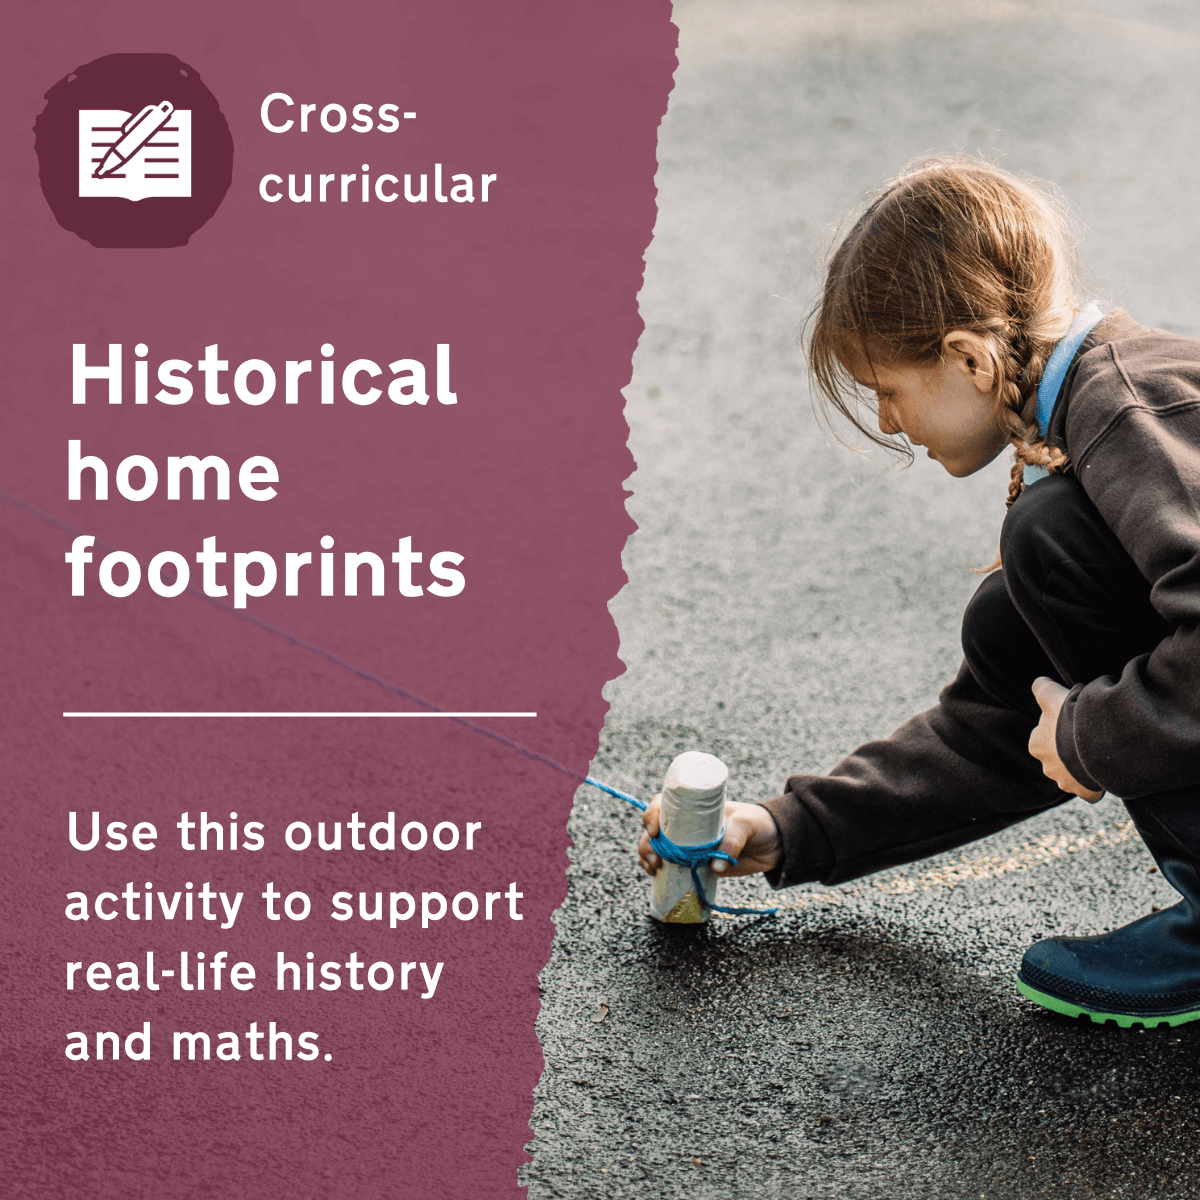 Use this primary cross-curricular activity to create historical homes to scale in your school grounds. This outdoor lesson idea supports real-life history and maths learning, as well as creating a stimulus for other cross curricular learning.